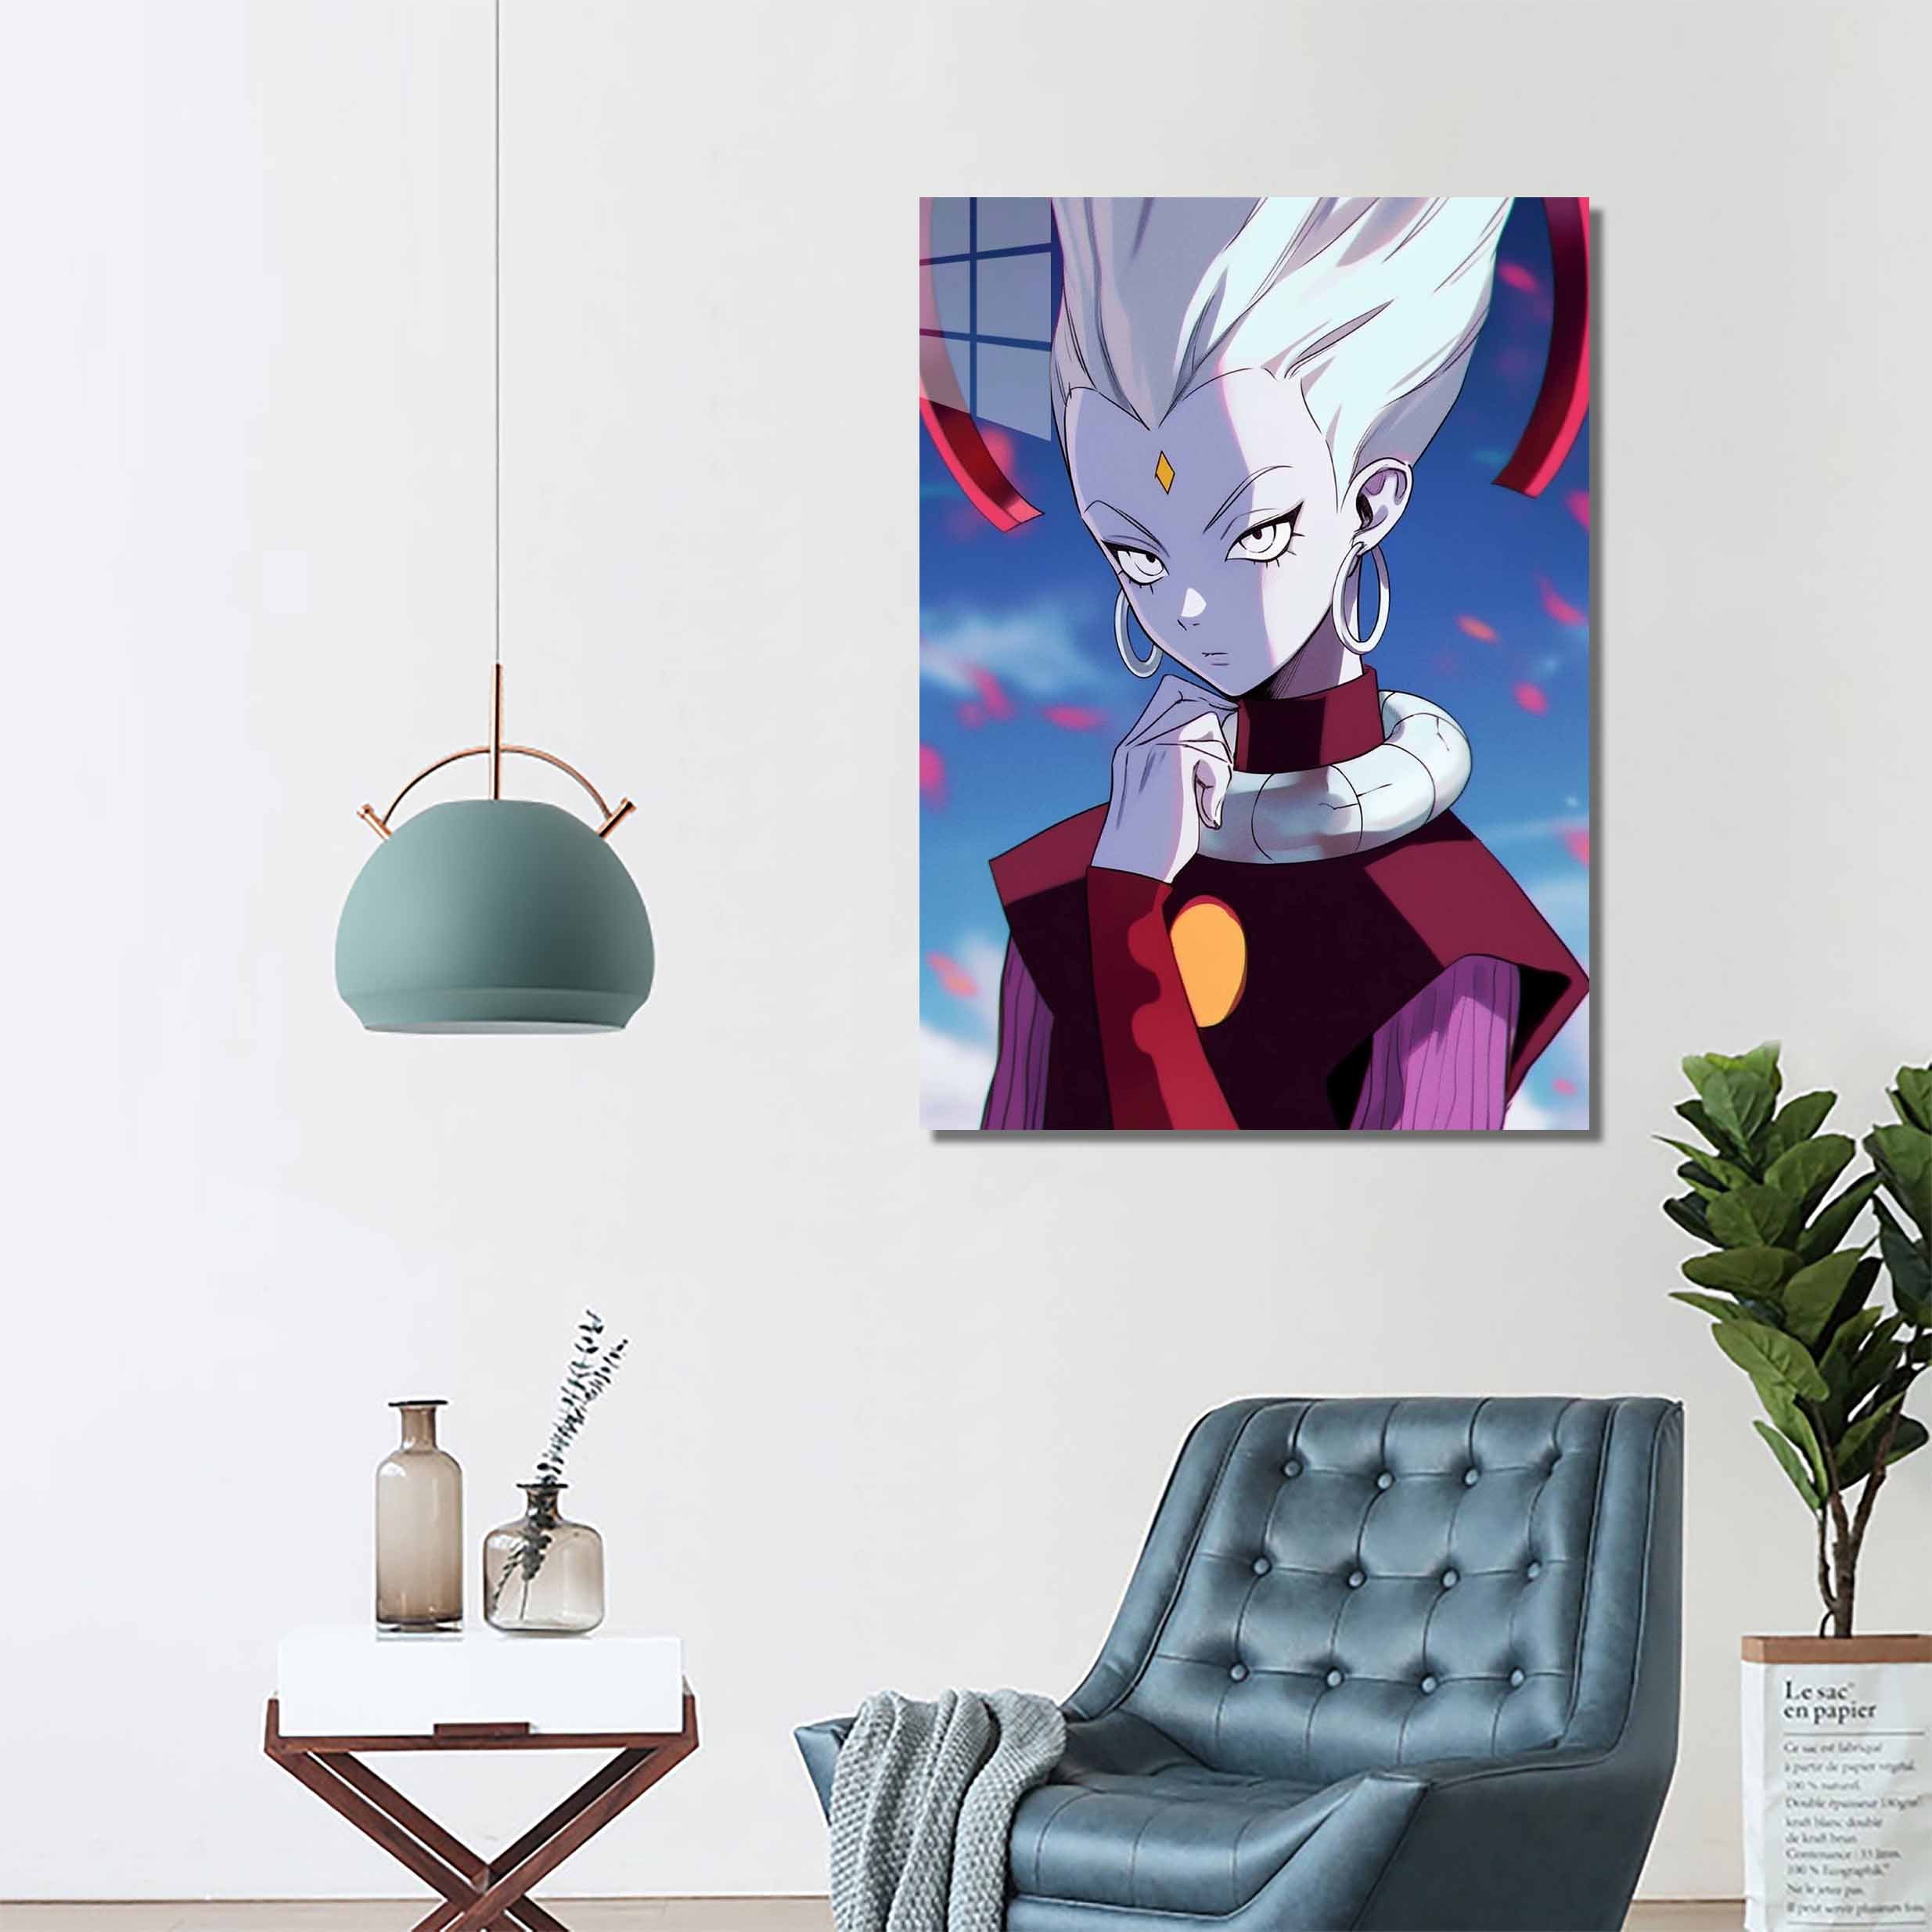 Beyond Godly_ Whis's Journey Across Infinite Realms